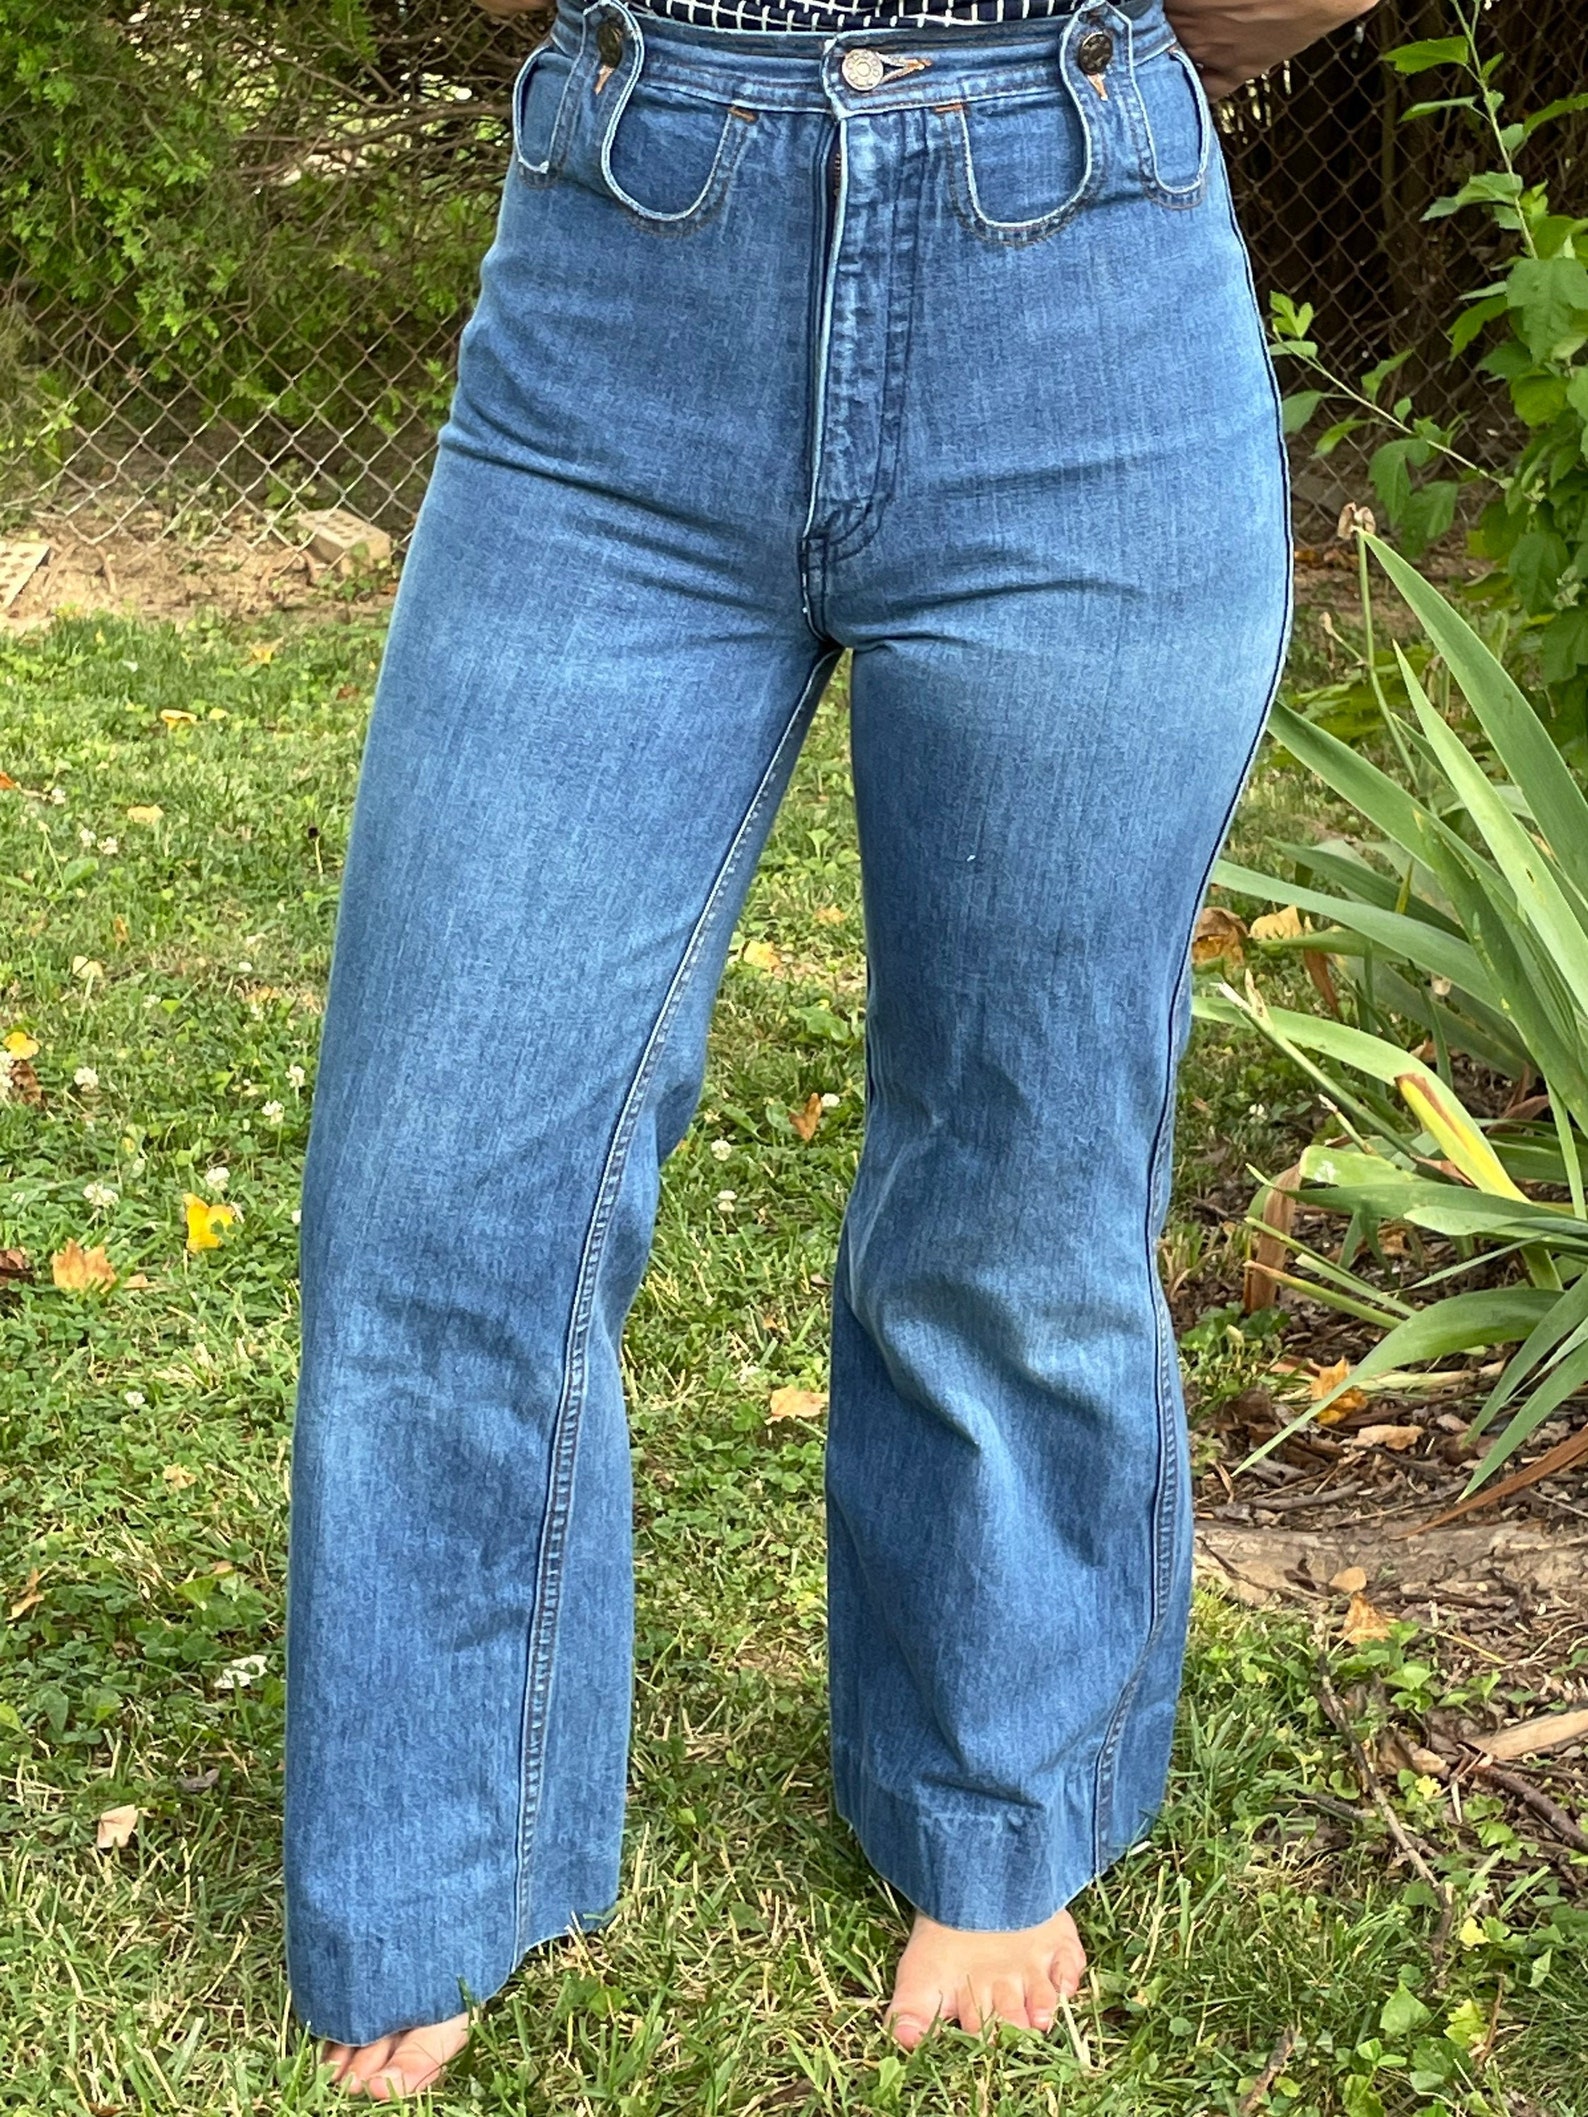 Vintage 1970s bell bottom womens jeans | Etsy